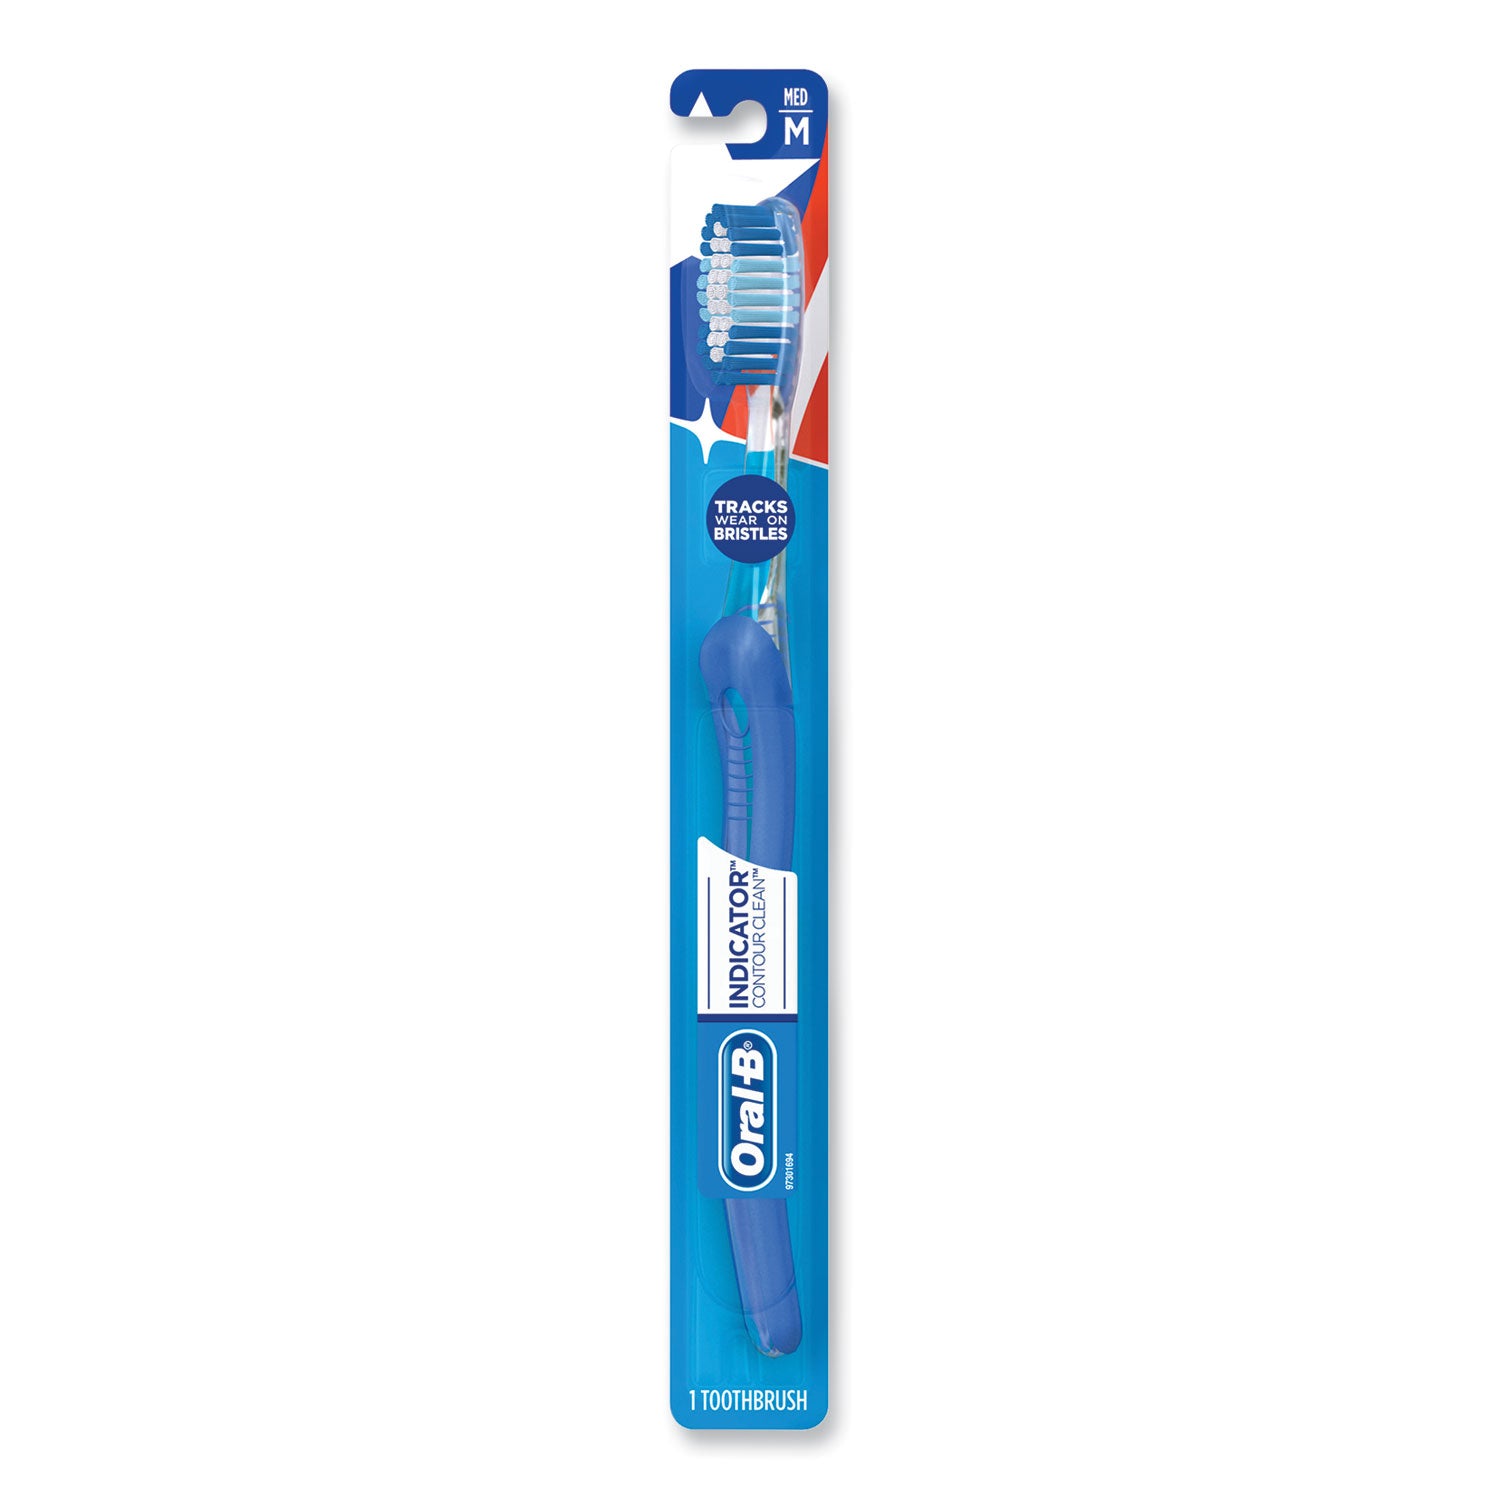 indicator-contour-clean-soft-toothbrush-blue_pgc80200 - 1